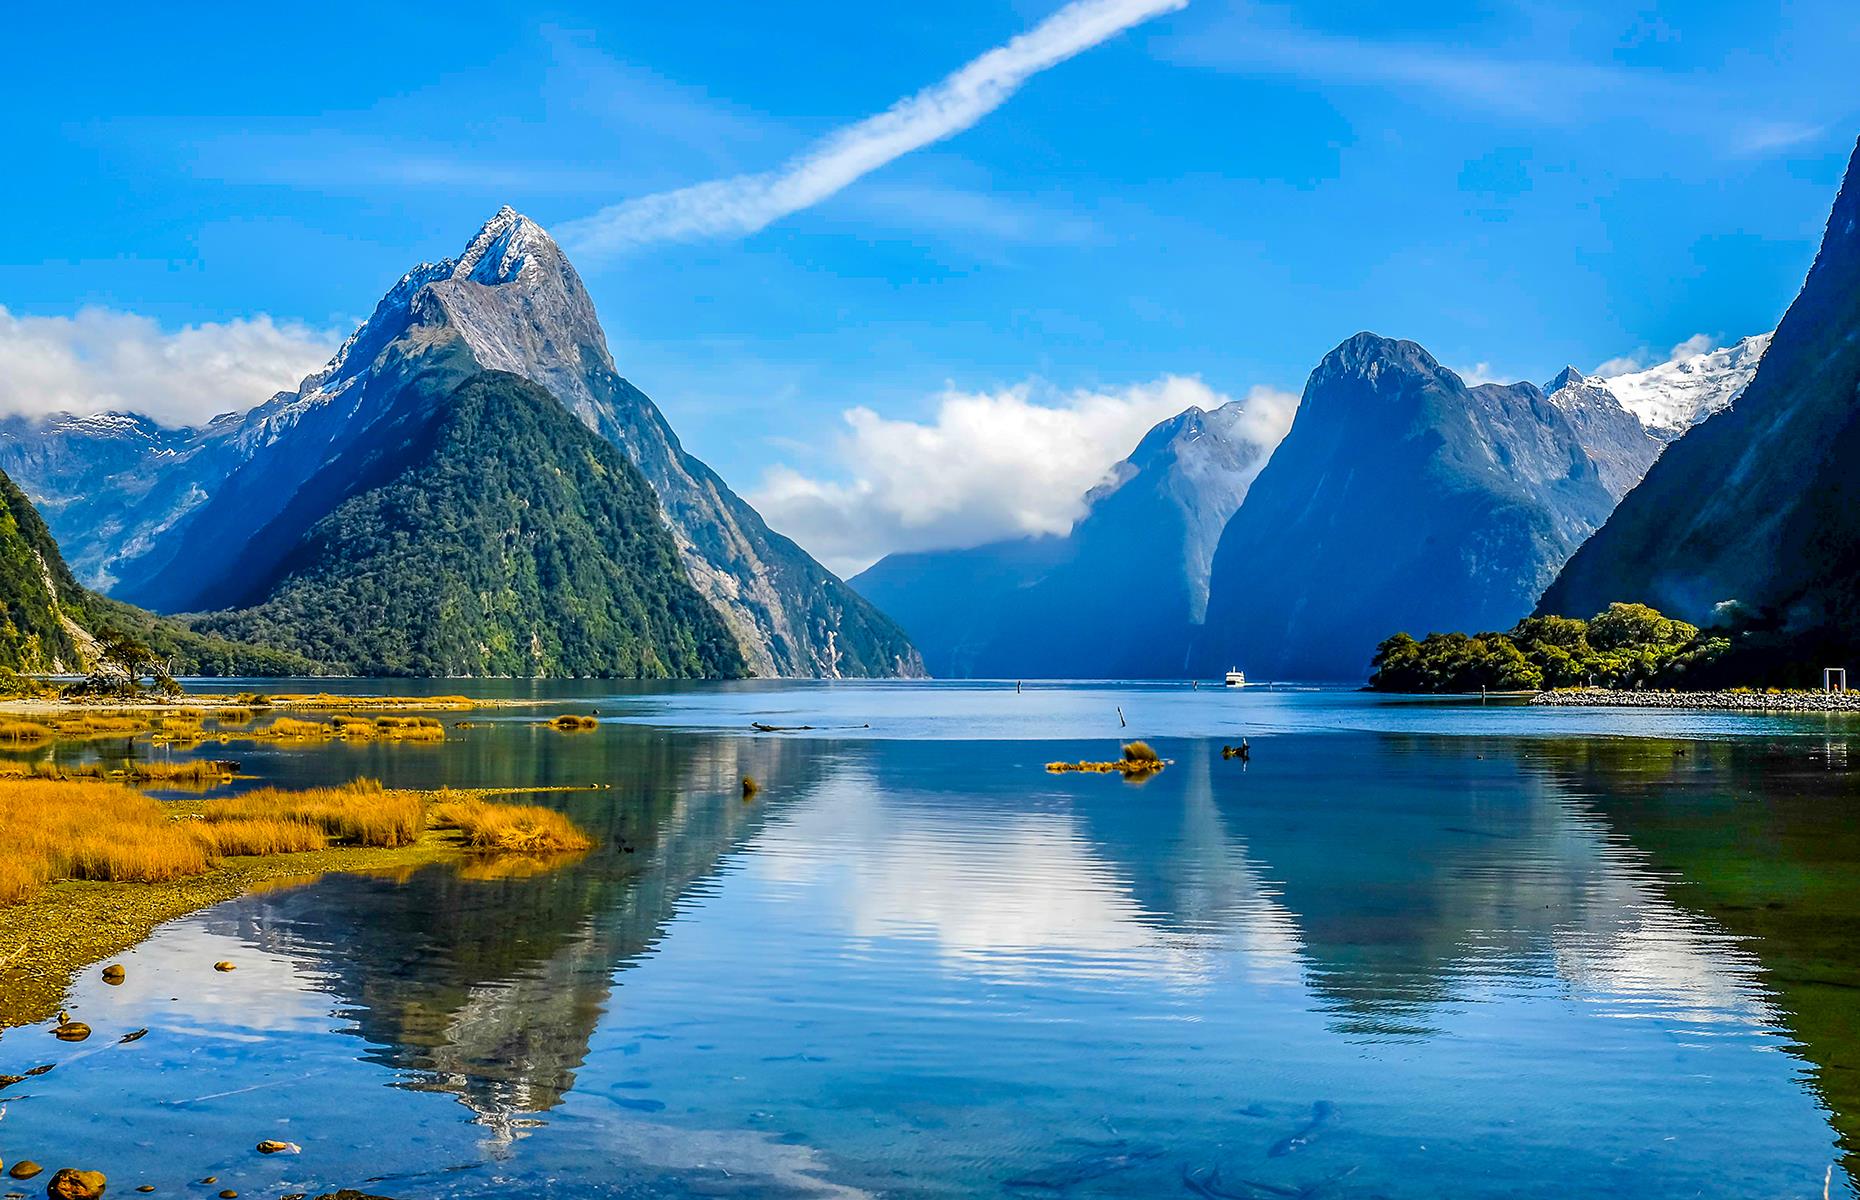 <p>Milford and Doubtful Sounds are among New Zealand's most beautiful stretches of water and paddling is the ideal way to see South Island's fjords close up. Hire a kayak and go out solo or join an organized overnight trip to camp out.</p>